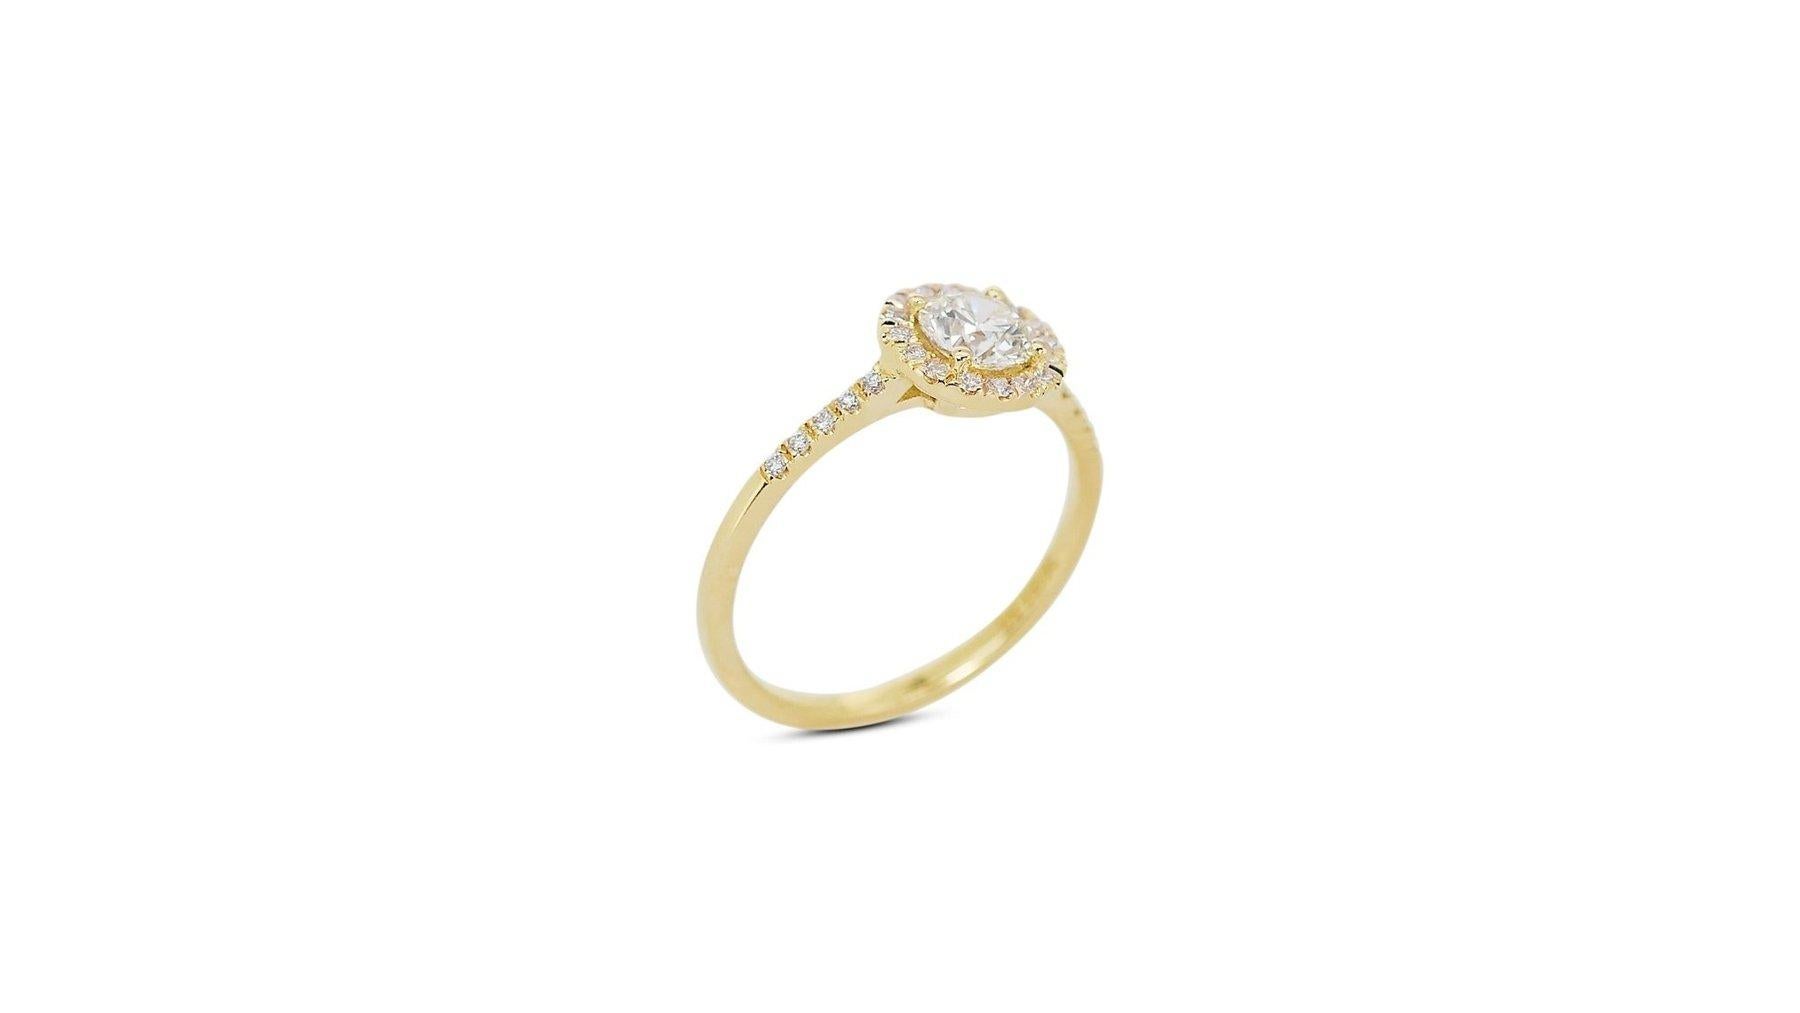 Captivating 18k Yellow Gold Natural Diamond Halo Ring w/1.21 ct- GIA Certified For Sale 1